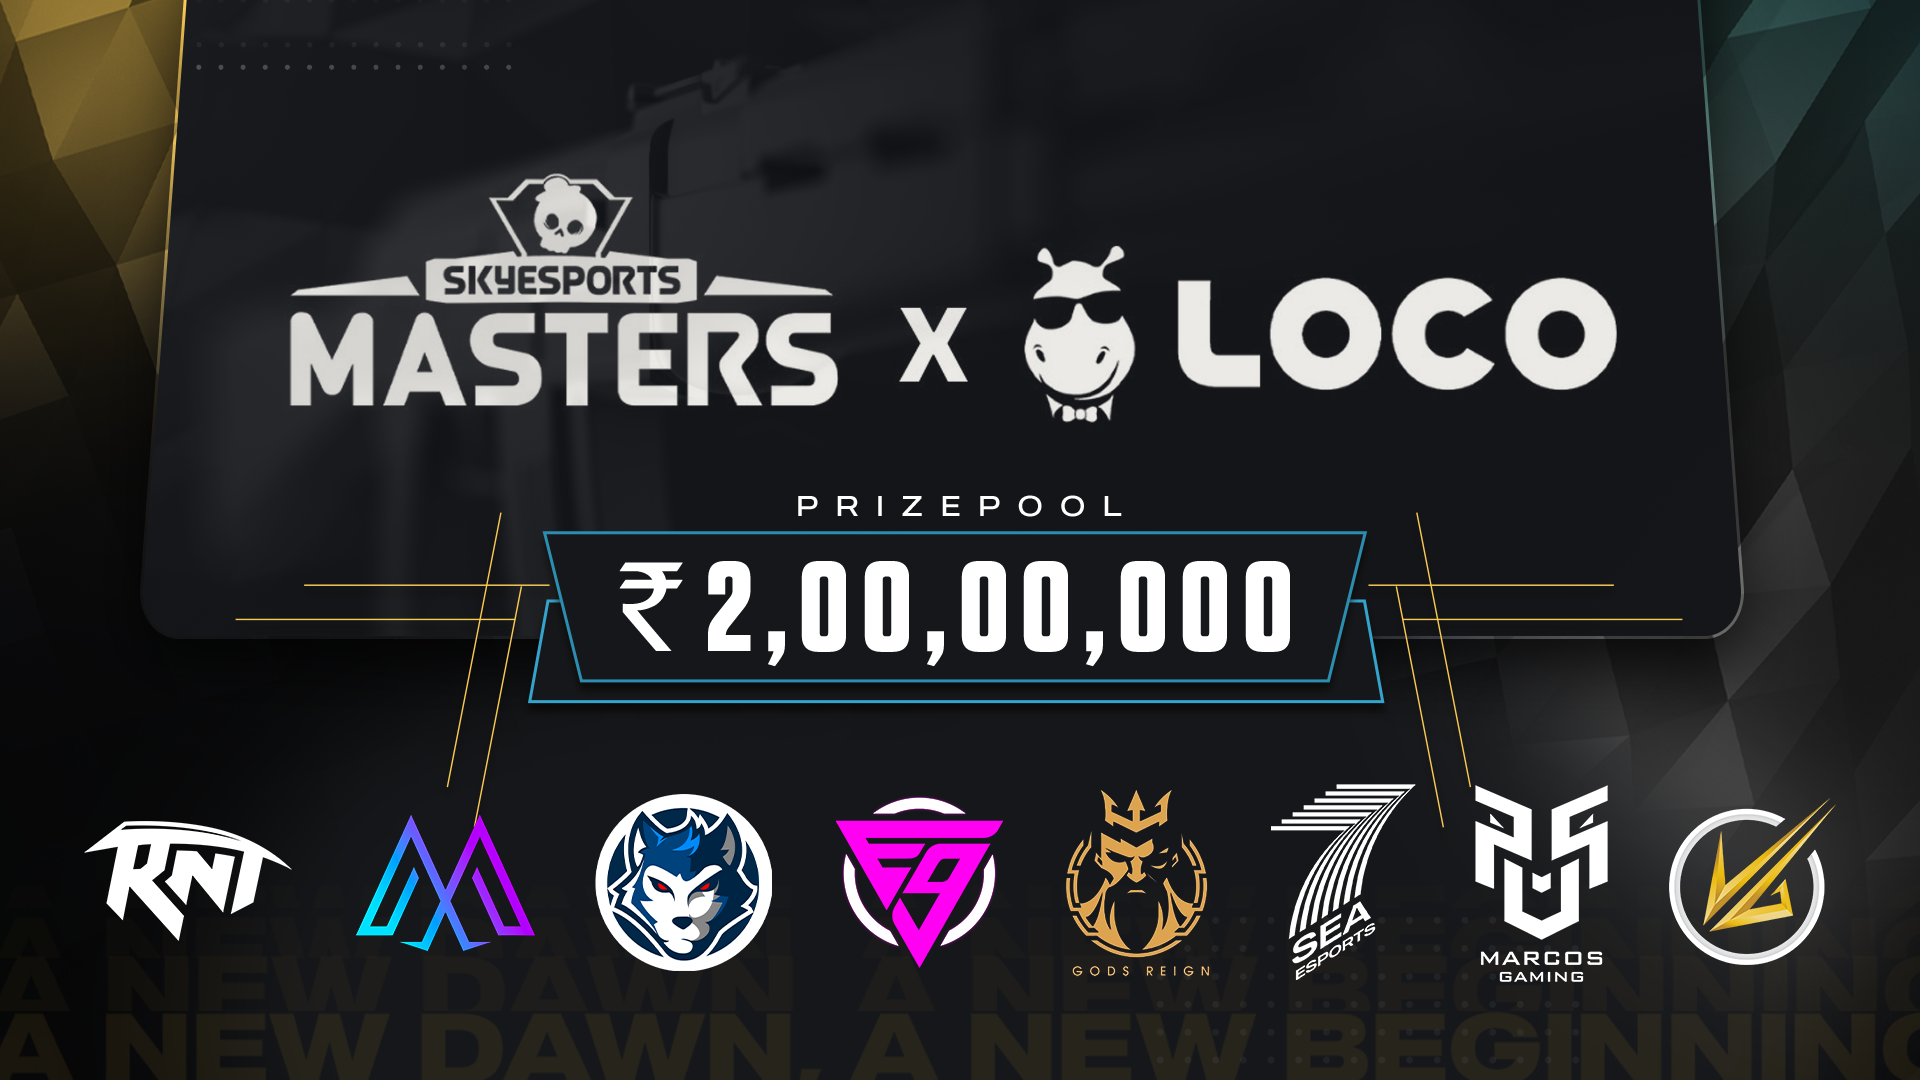 Skyesports and Loco Join Forces: Broadcasting Partnership for Skyesports Masters, India's Rs. 2 Crore Franchised Esports Tournament